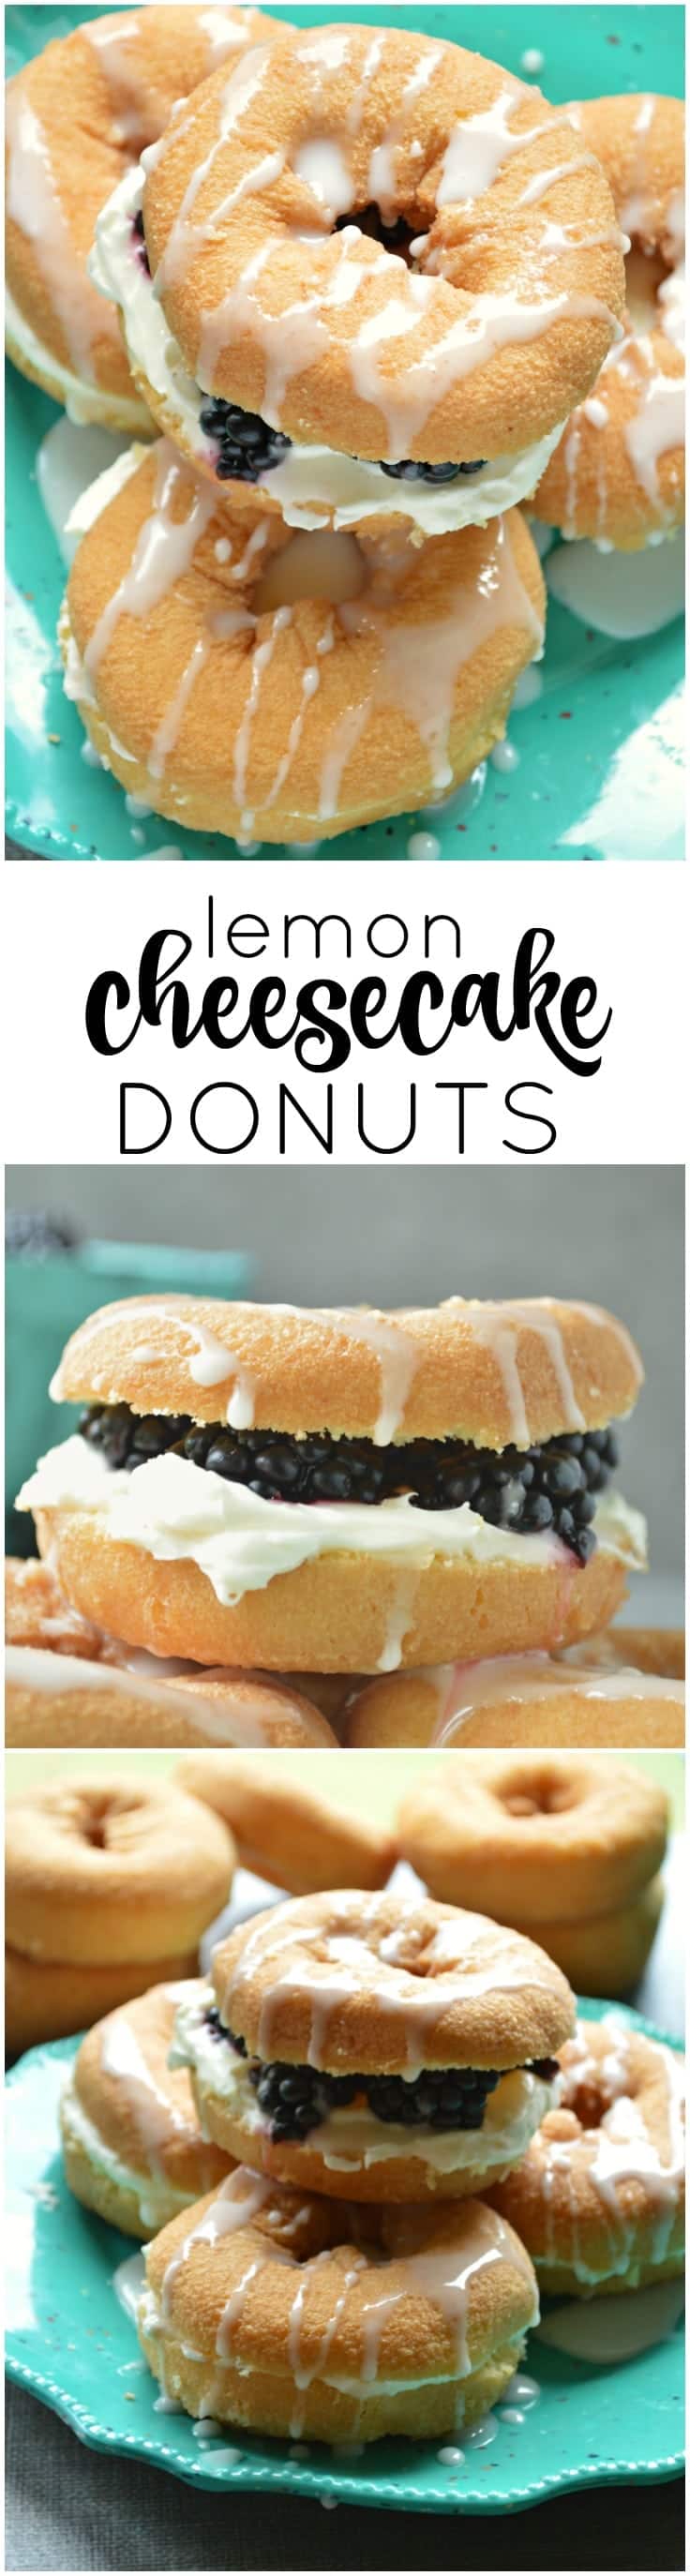 These Lemon Cheesecake Donuts are fruity delicious and come together fast! Soft cake donuts with a cheesecake filling anf fresh fruit; perfect for any breakfast or brunch table and pretty enough for showers!